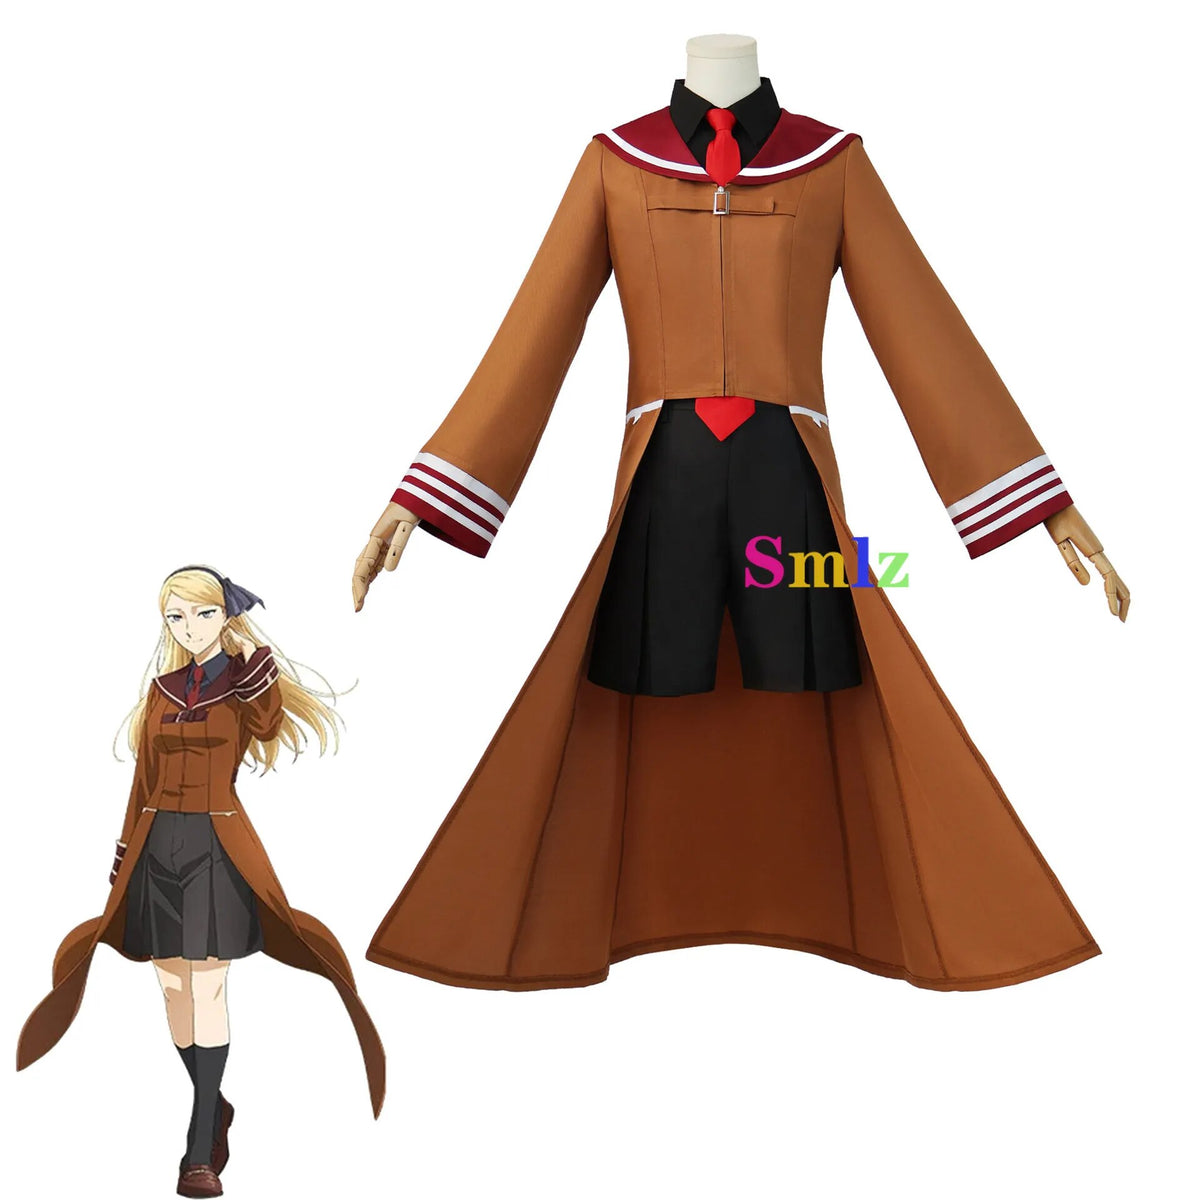 Elias Ainsworth Cosplay Anime The Ancient Magus Bride Costume Chise Hatori Cosplay Trench Cloak Halloween Uniform Mask